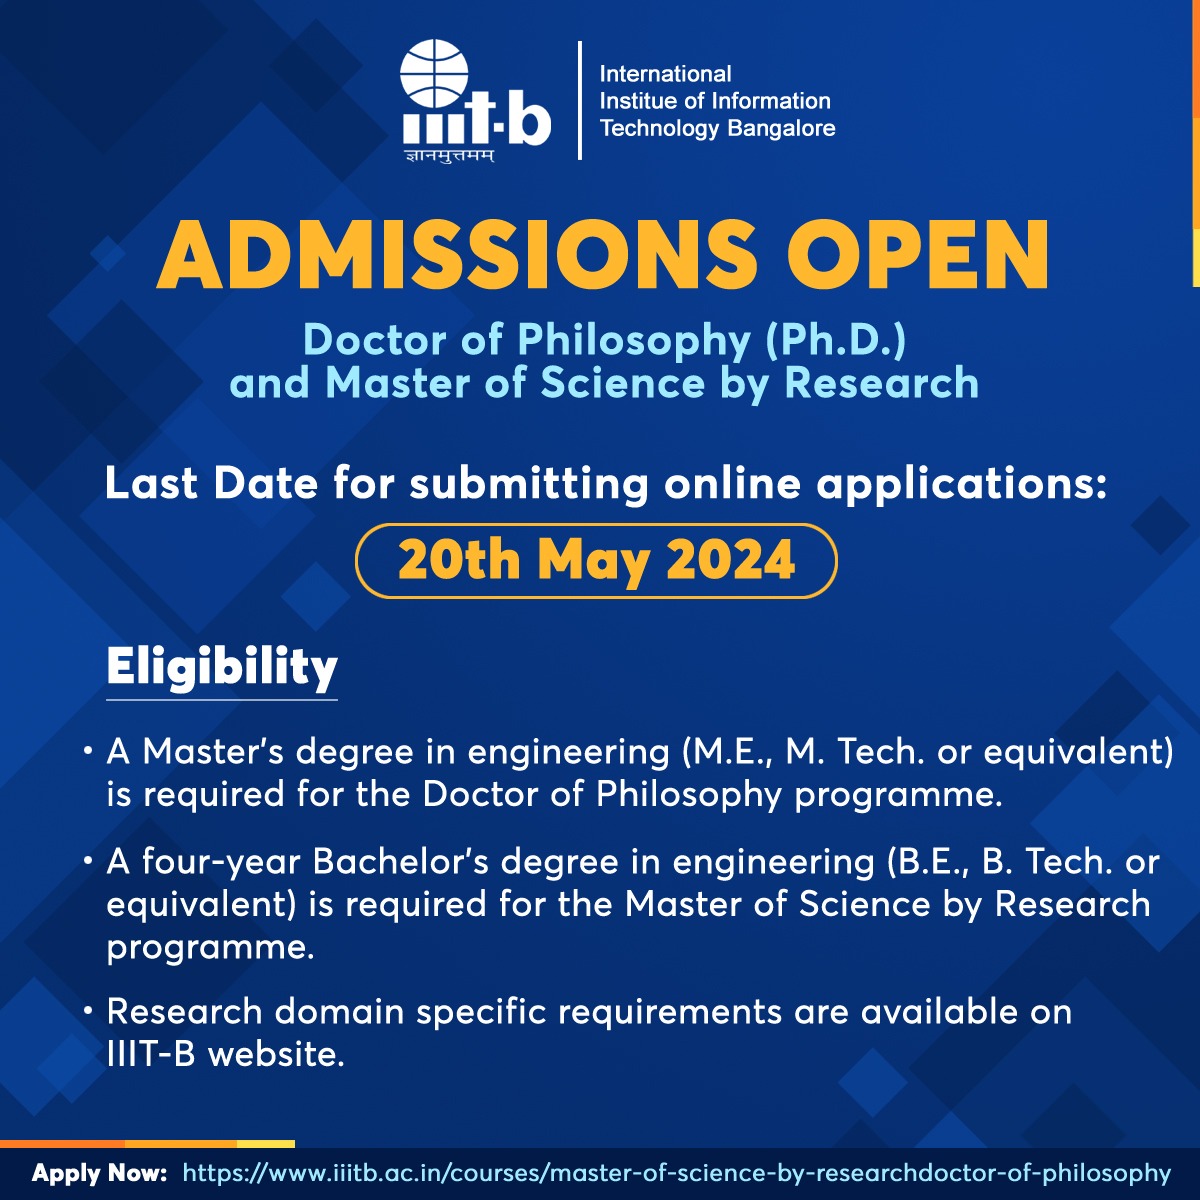 #AdmissionsOpen for Doctor of Philosophy (Ph.D.) and Master of Science by Research Last Date for submitting online applications: 20th May 2024 Apply Now: iiitb.ac.in/courses/master… #IIITB #IIITBangalore #ResearchProgrammes